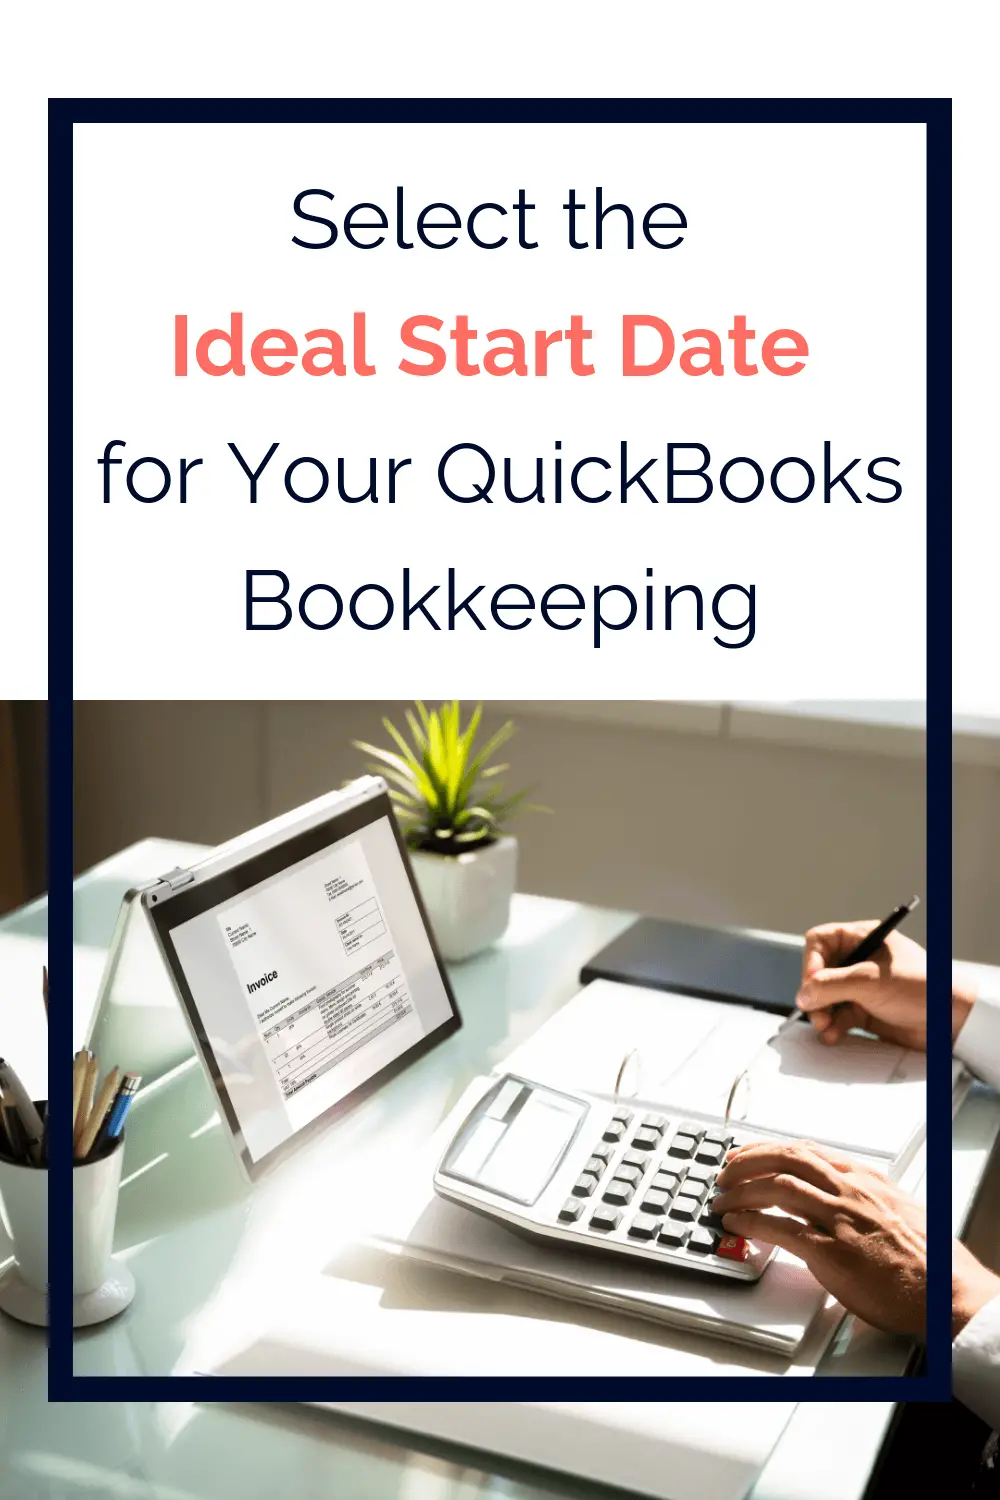 Select the Ideal Start Date for your QuickBooks bookkeeping